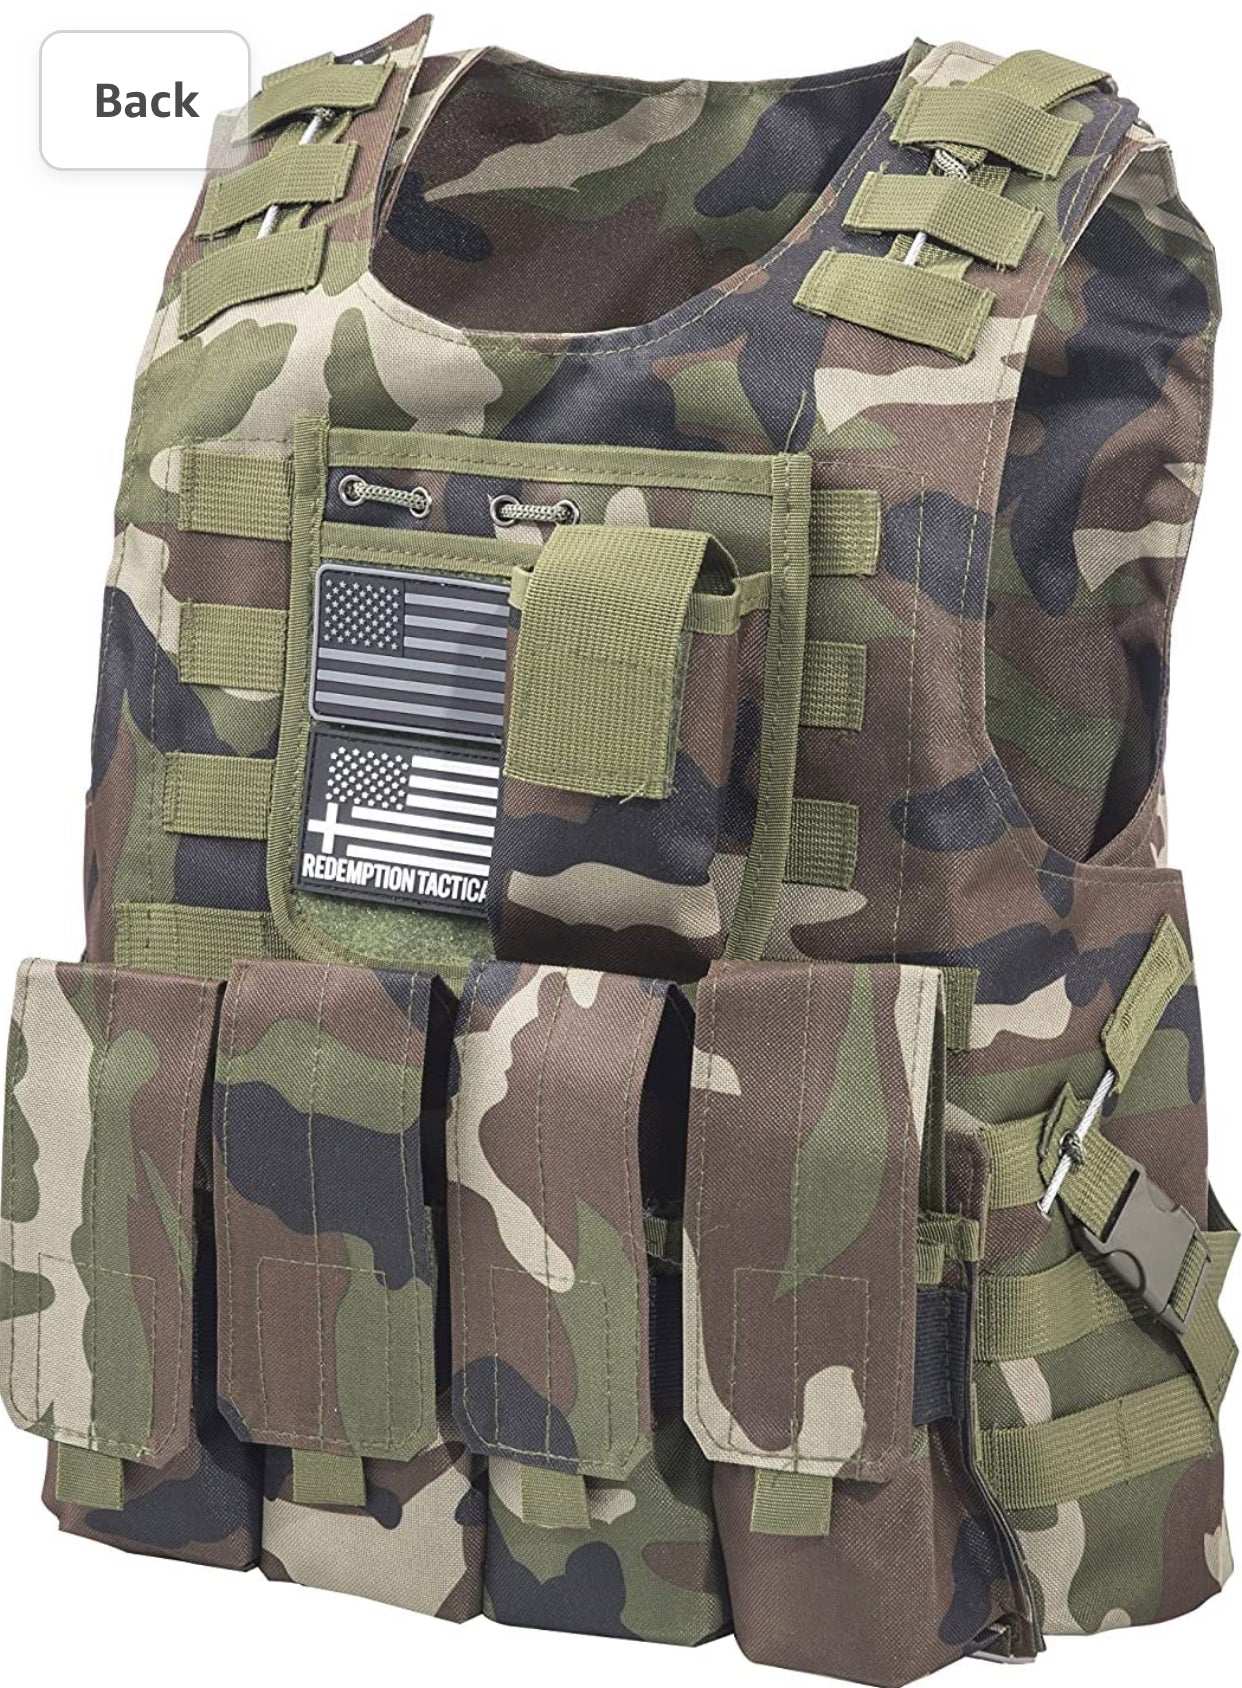 GILET TATTICO 1000D CON MOLLE - COMBAT JACKETS - PLATE CARRIERS